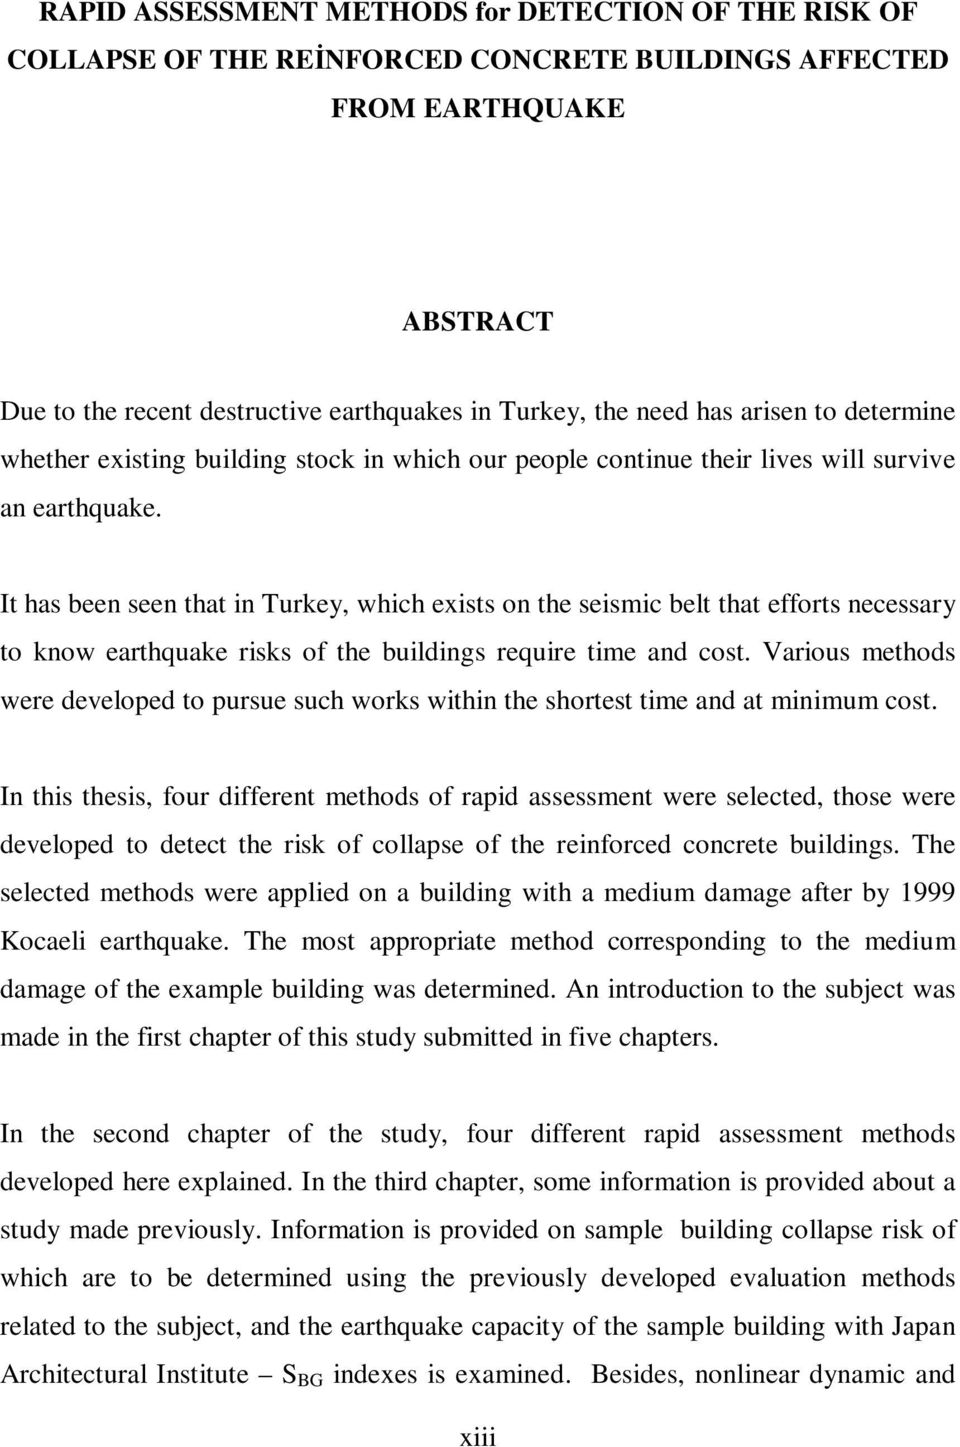 It has been seen that in Turkey, which exists on the seismic belt that efforts necessary to know earthquake risks of the buildings require time and cost.